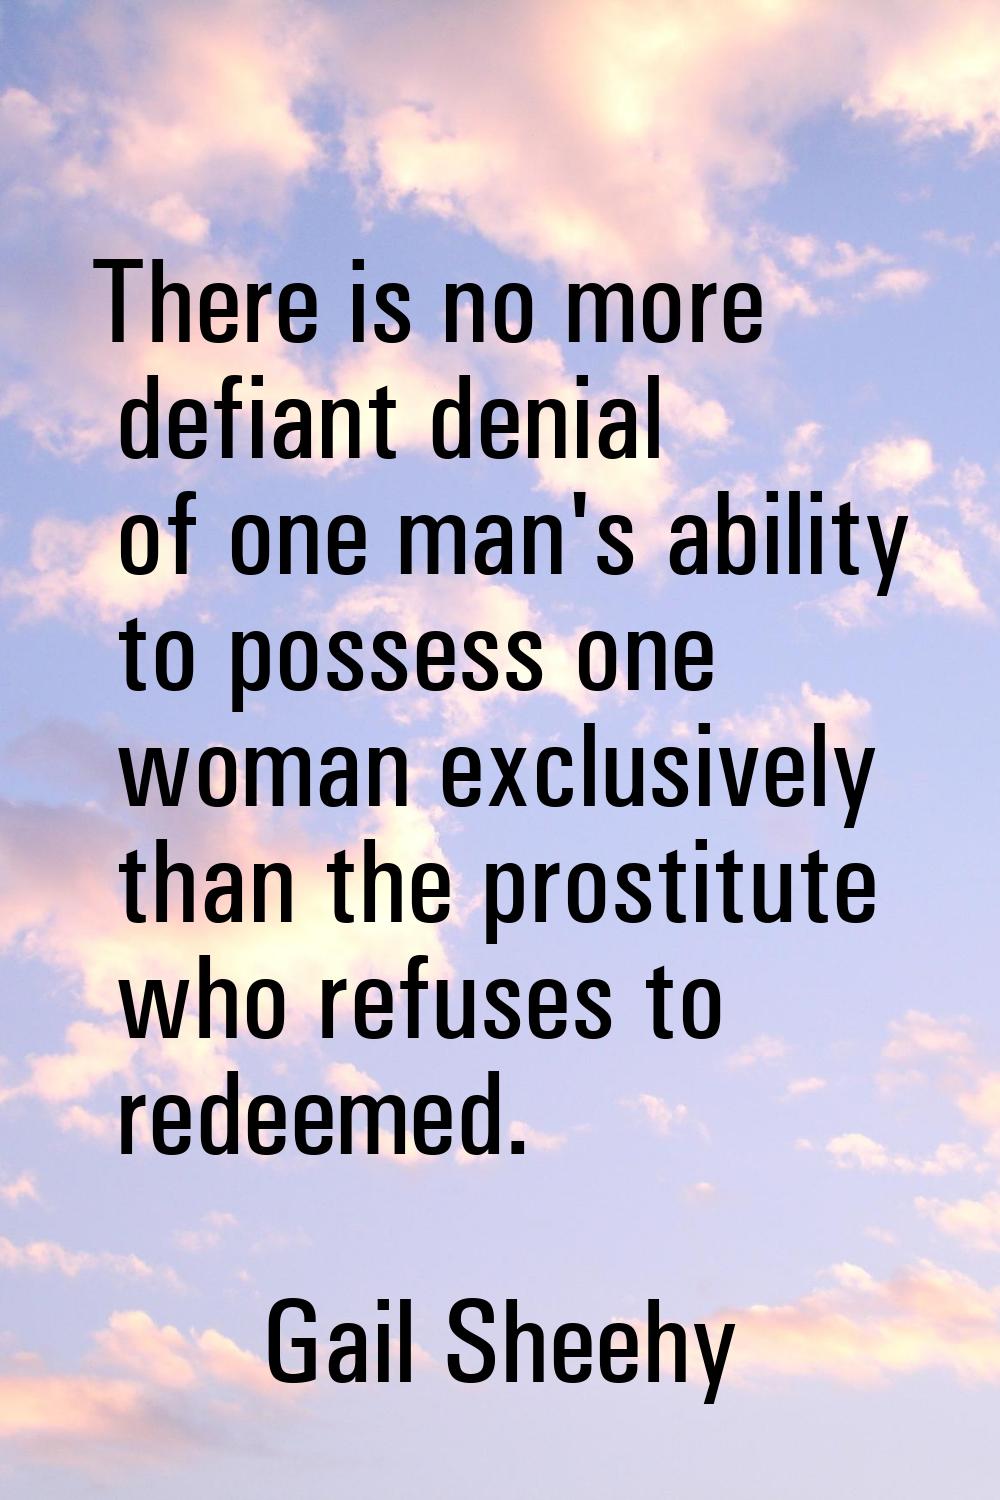 There is no more defiant denial of one man's ability to possess one woman exclusively than the pros